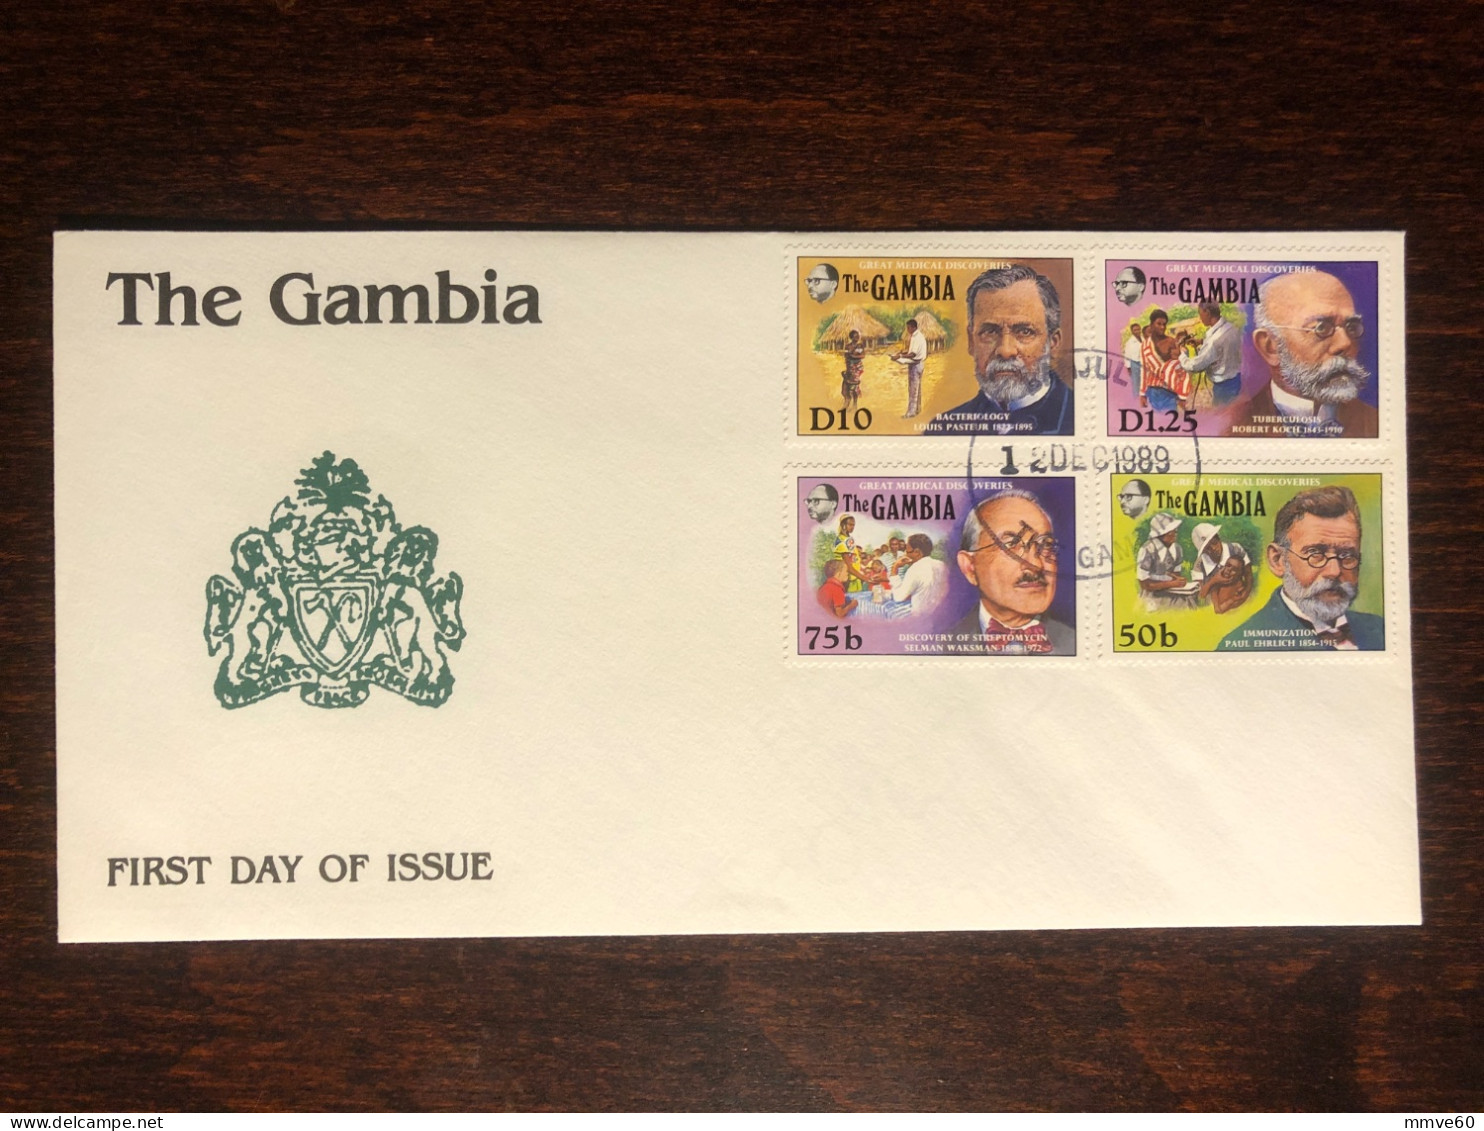 GAMBIA FDC COVER 1989 YEAR MEDICAL PIONIERS - KOCH, PASTEUR, WAKSMAN, EHRLICH HEALTH MEDICINE STAMPS - Gambia (1965-...)